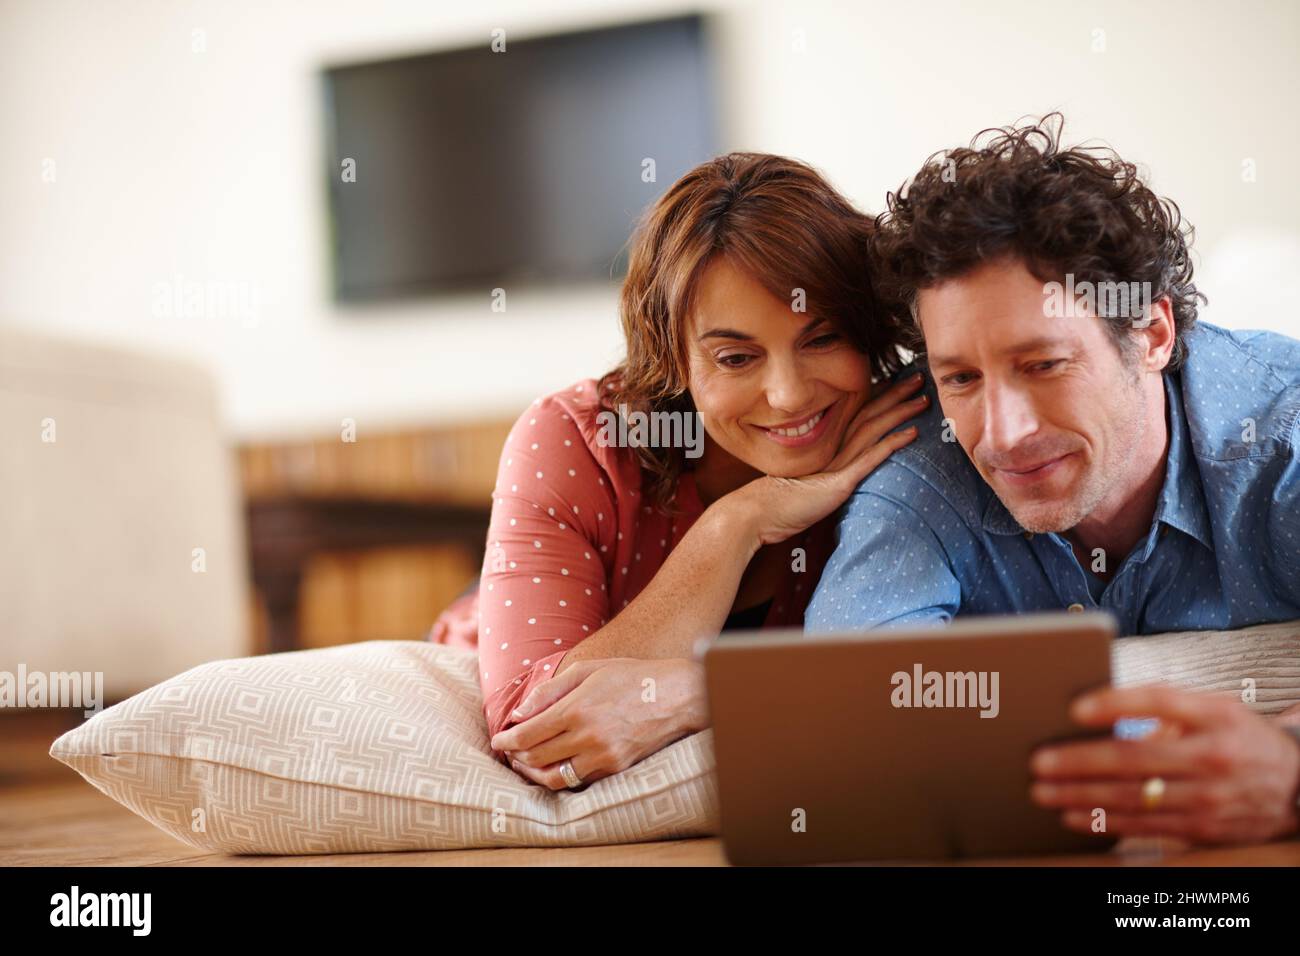 Time to unwind online. Shot of a husband and wife using a digital tablet together at home. Stock Photo